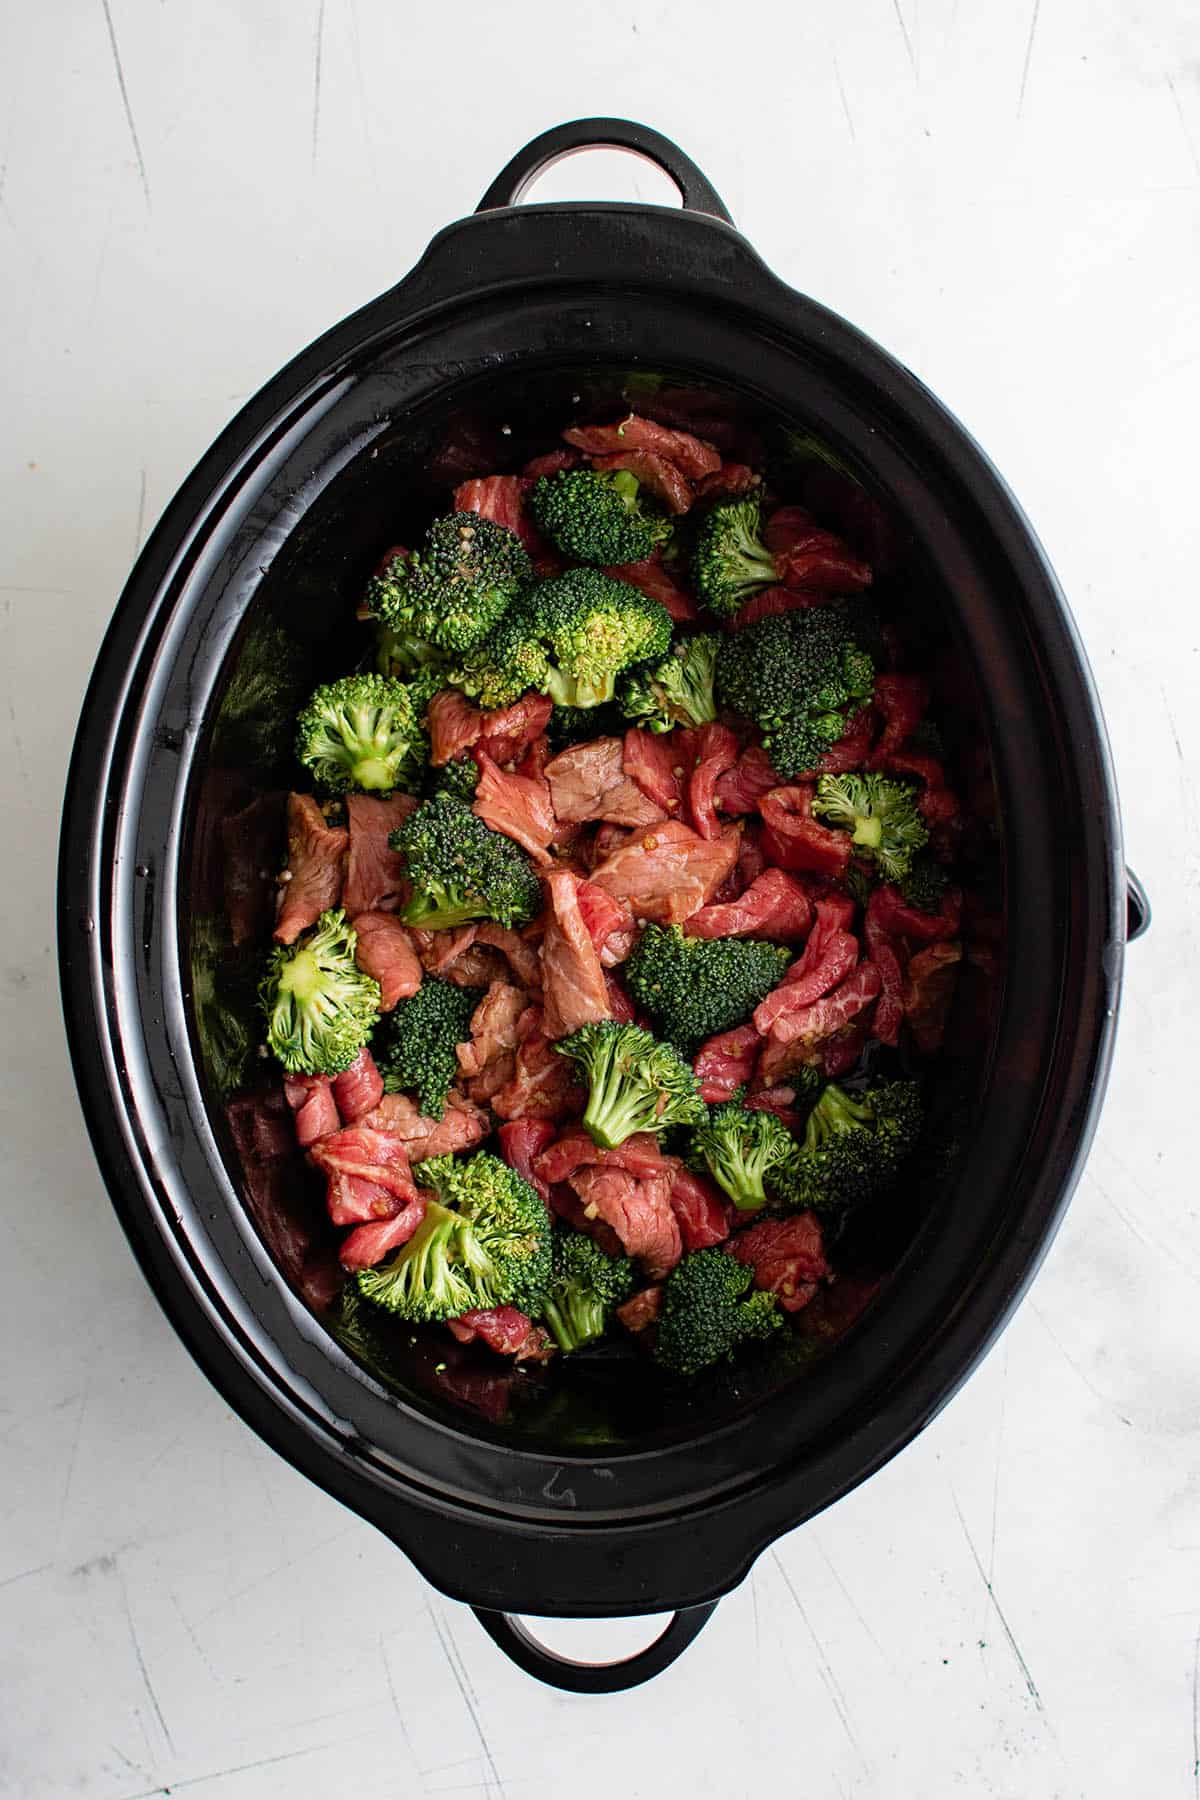 ingredients for beef and broccoli in the slow cooker